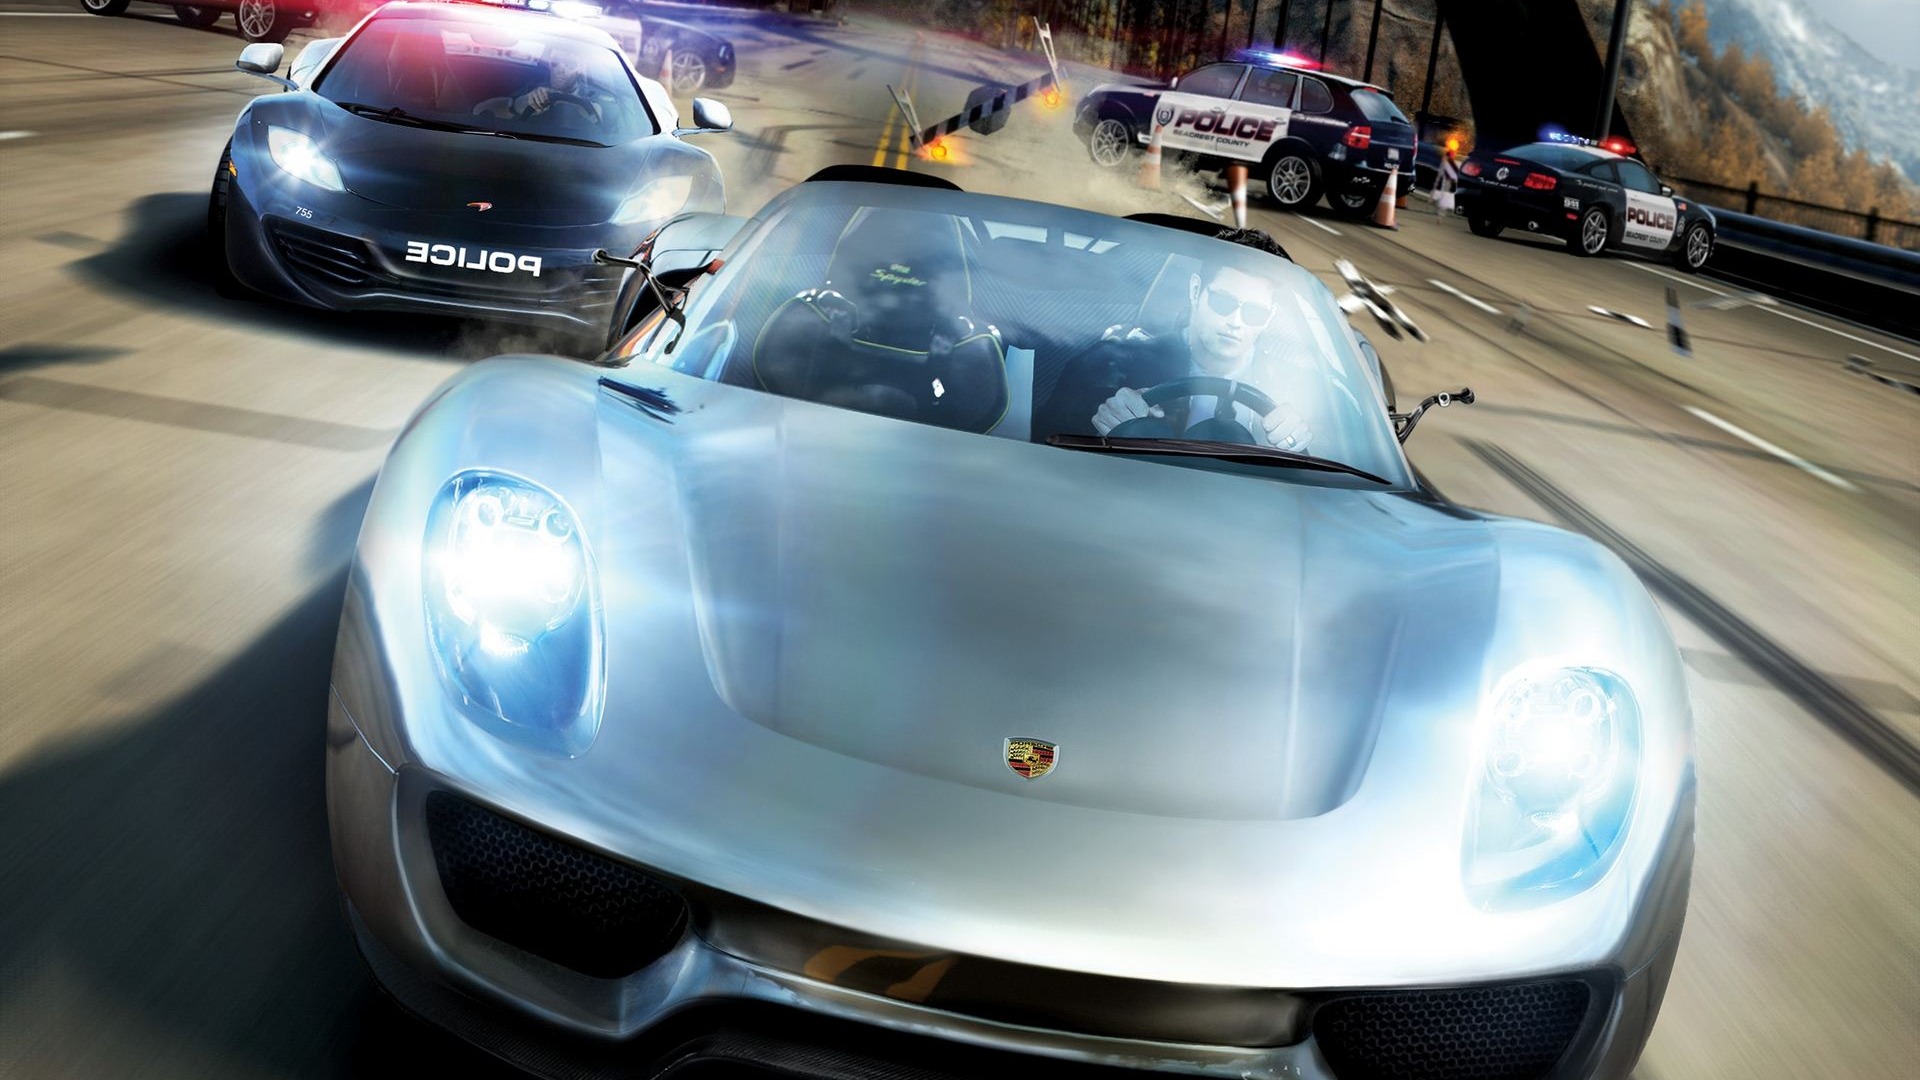 Need for Speed: Hot Pursuit 极品飞车14：热力追踪4 - 1920x1080